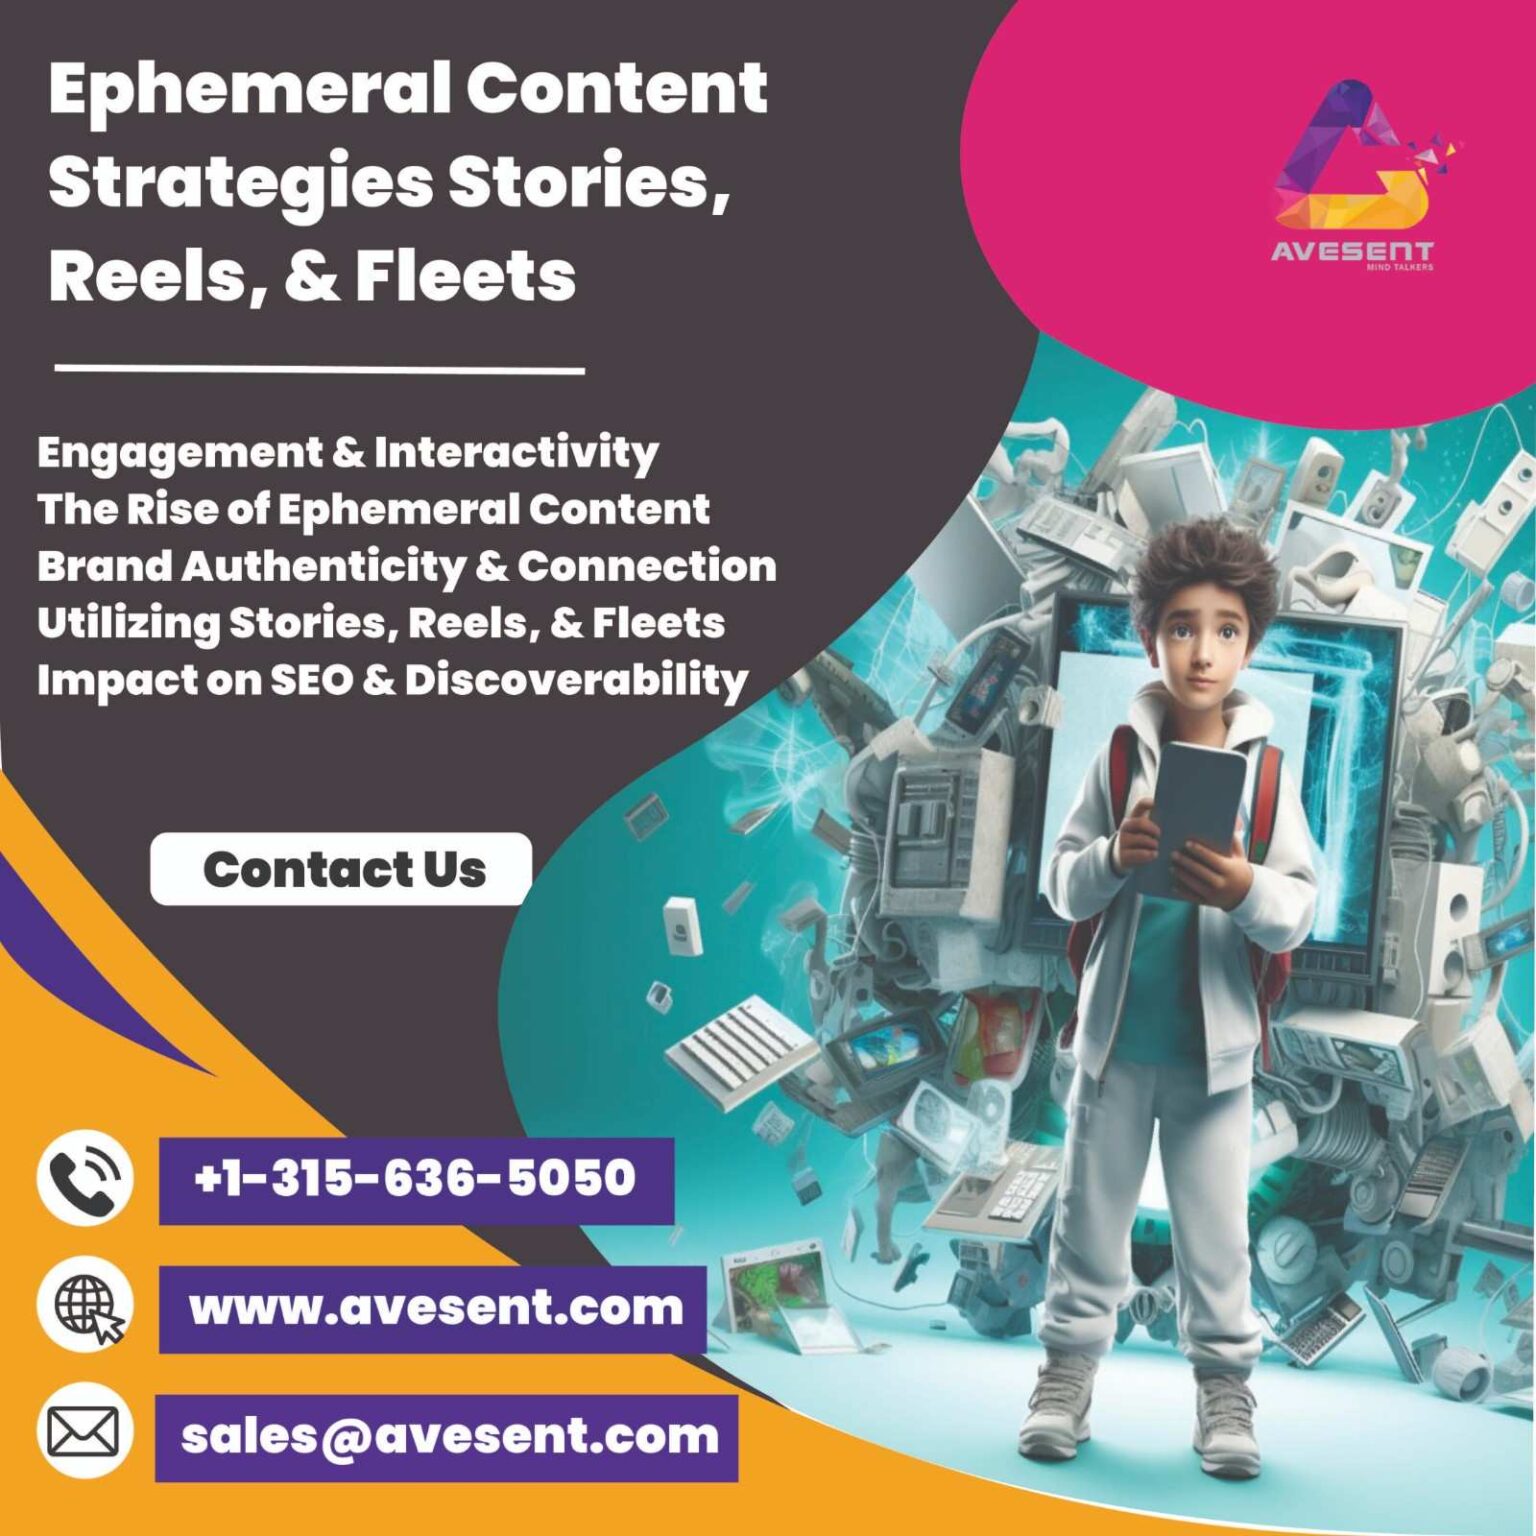 You are currently viewing Ephemeral Content Strategies Stories, Reels, and Fleets